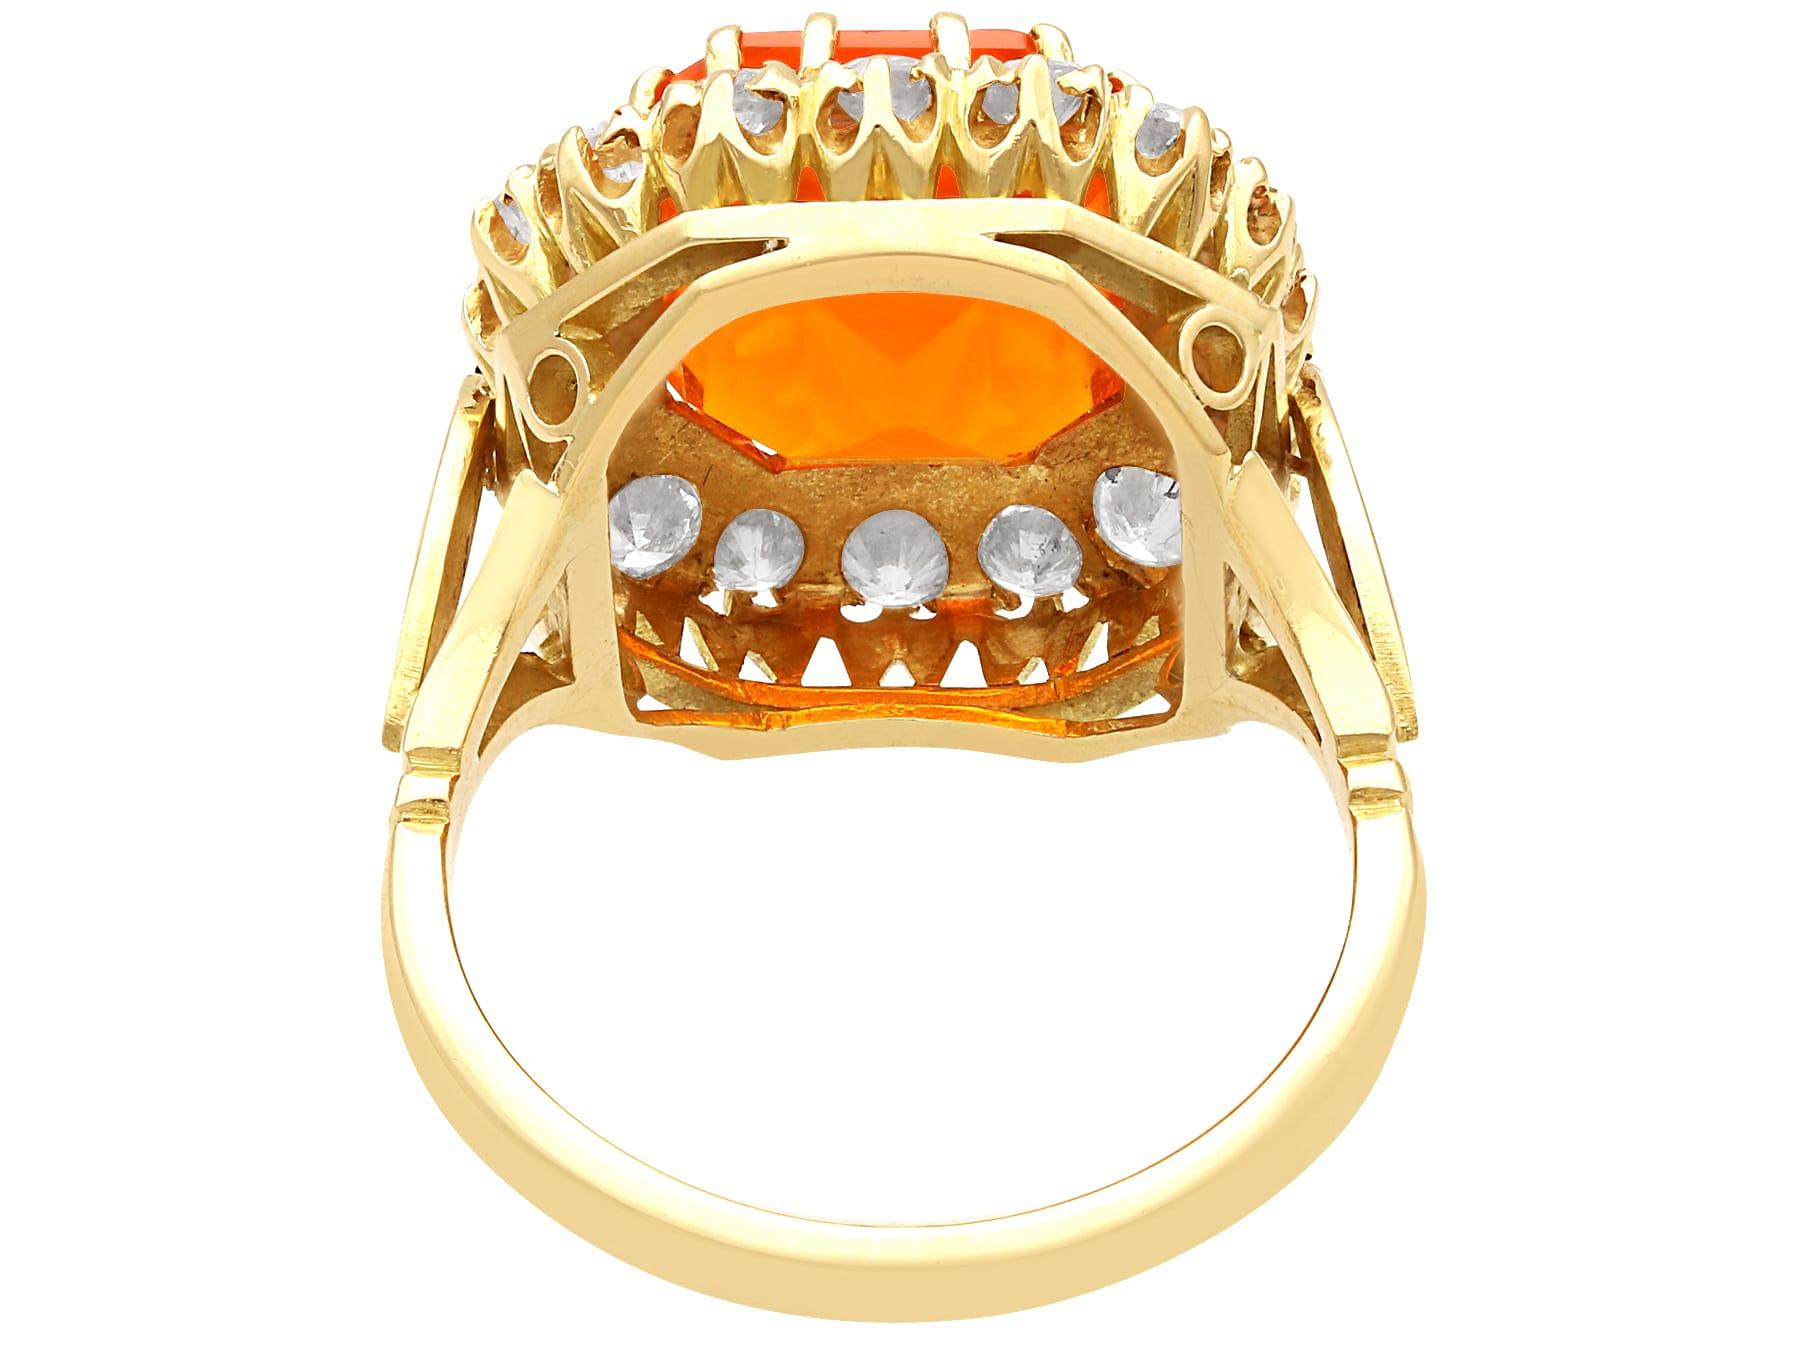 Emerald Cut Vintage 4.92 Carat Fire Opal and 1 Carat Diamond 18k Yellow Gold Dress Ring For Sale